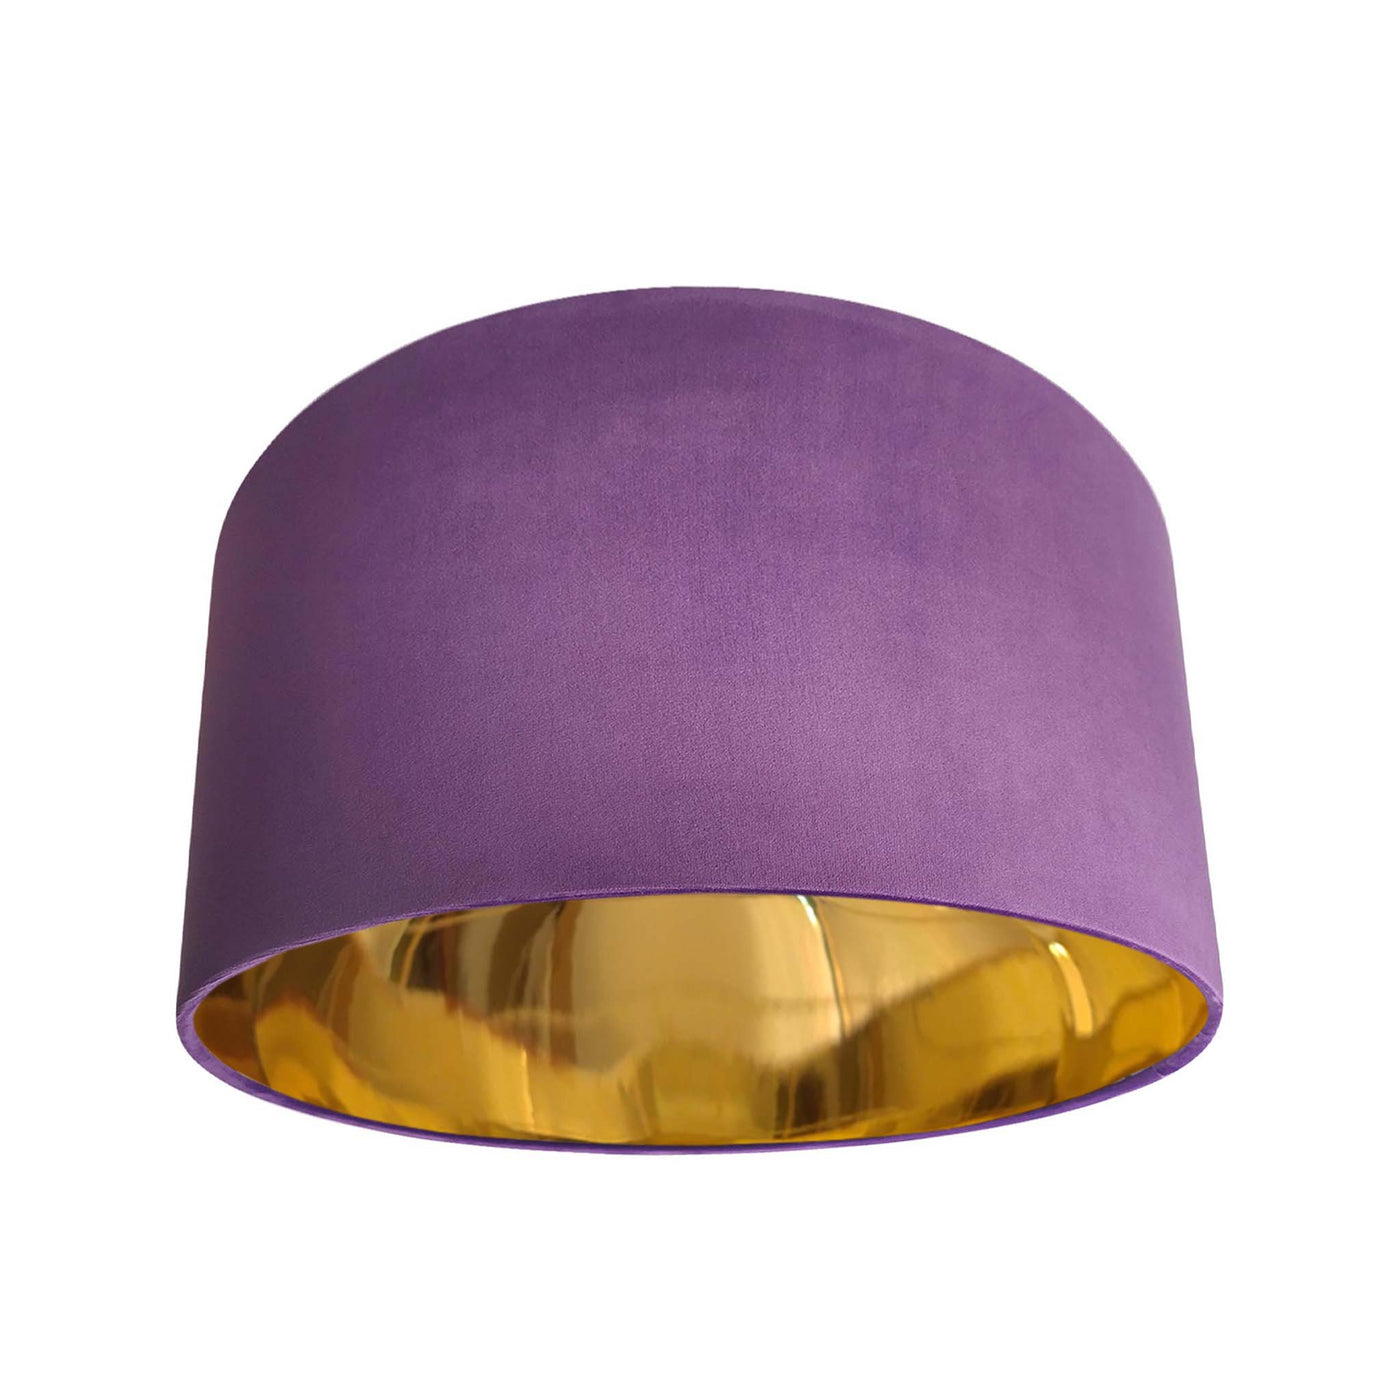 Amethyst Velvet Lampshade with Mirror Gold Lining